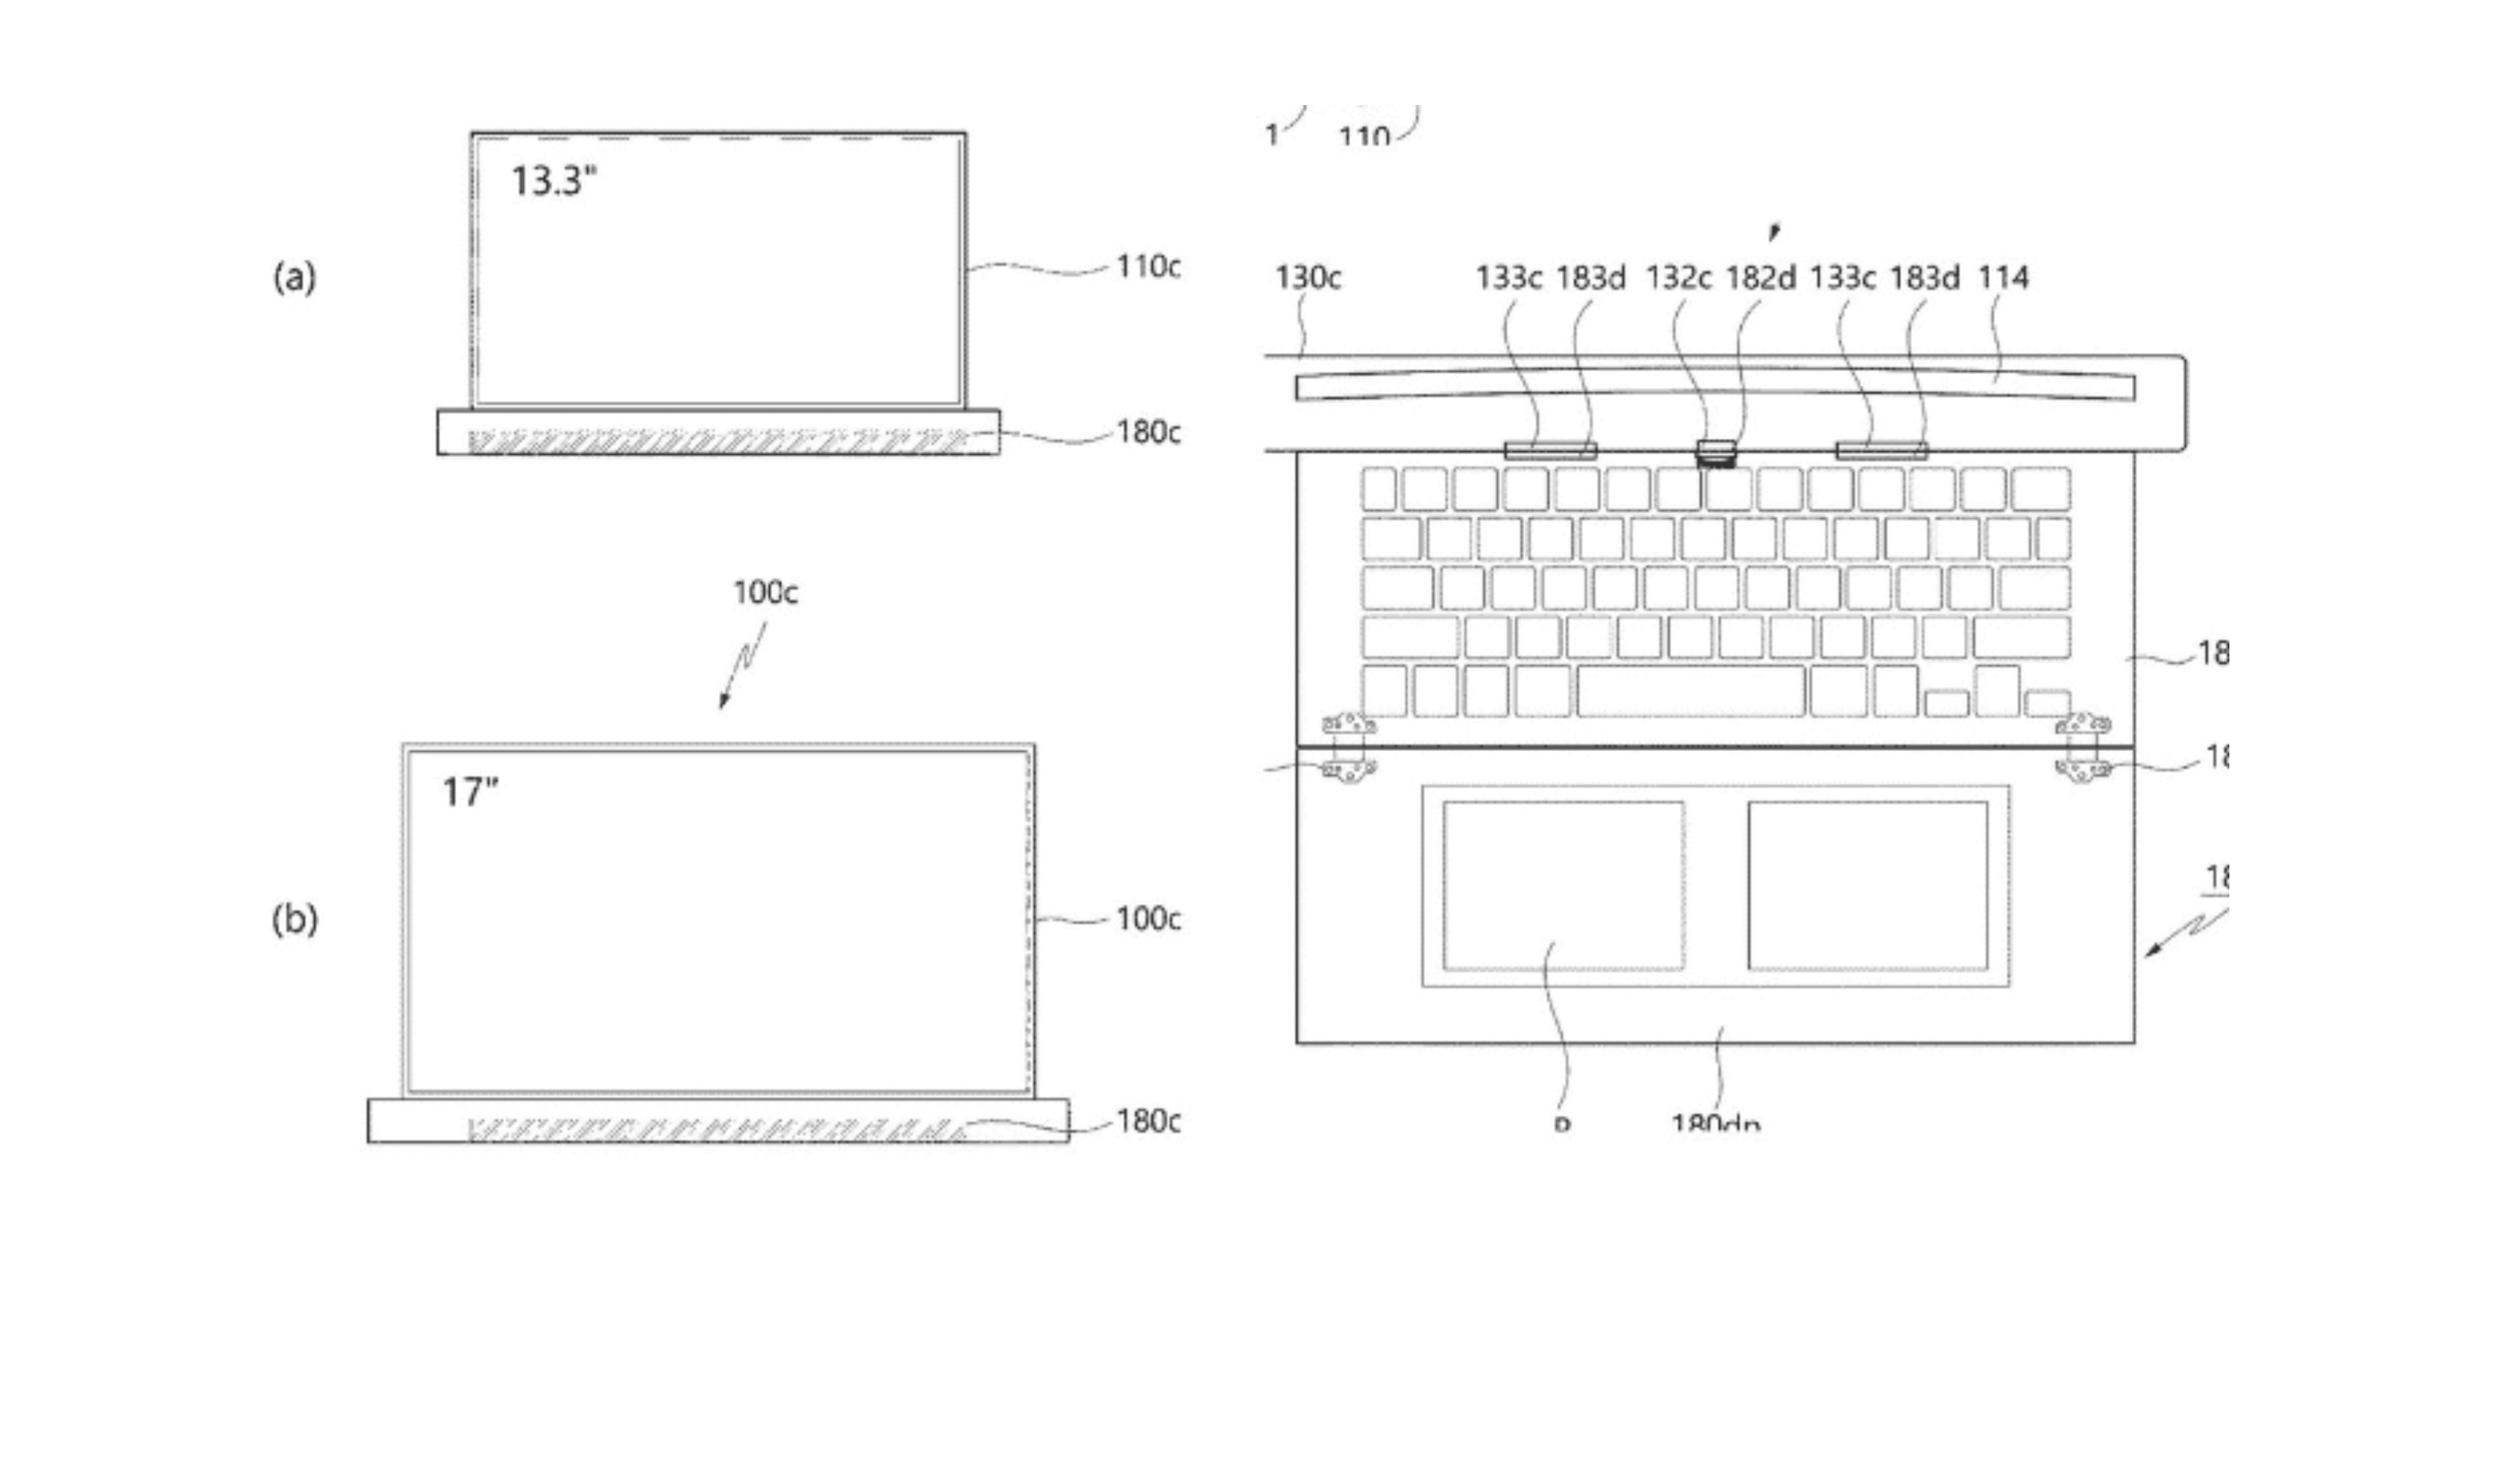 LG patents a 17-inch laptop with a rolling display; check details